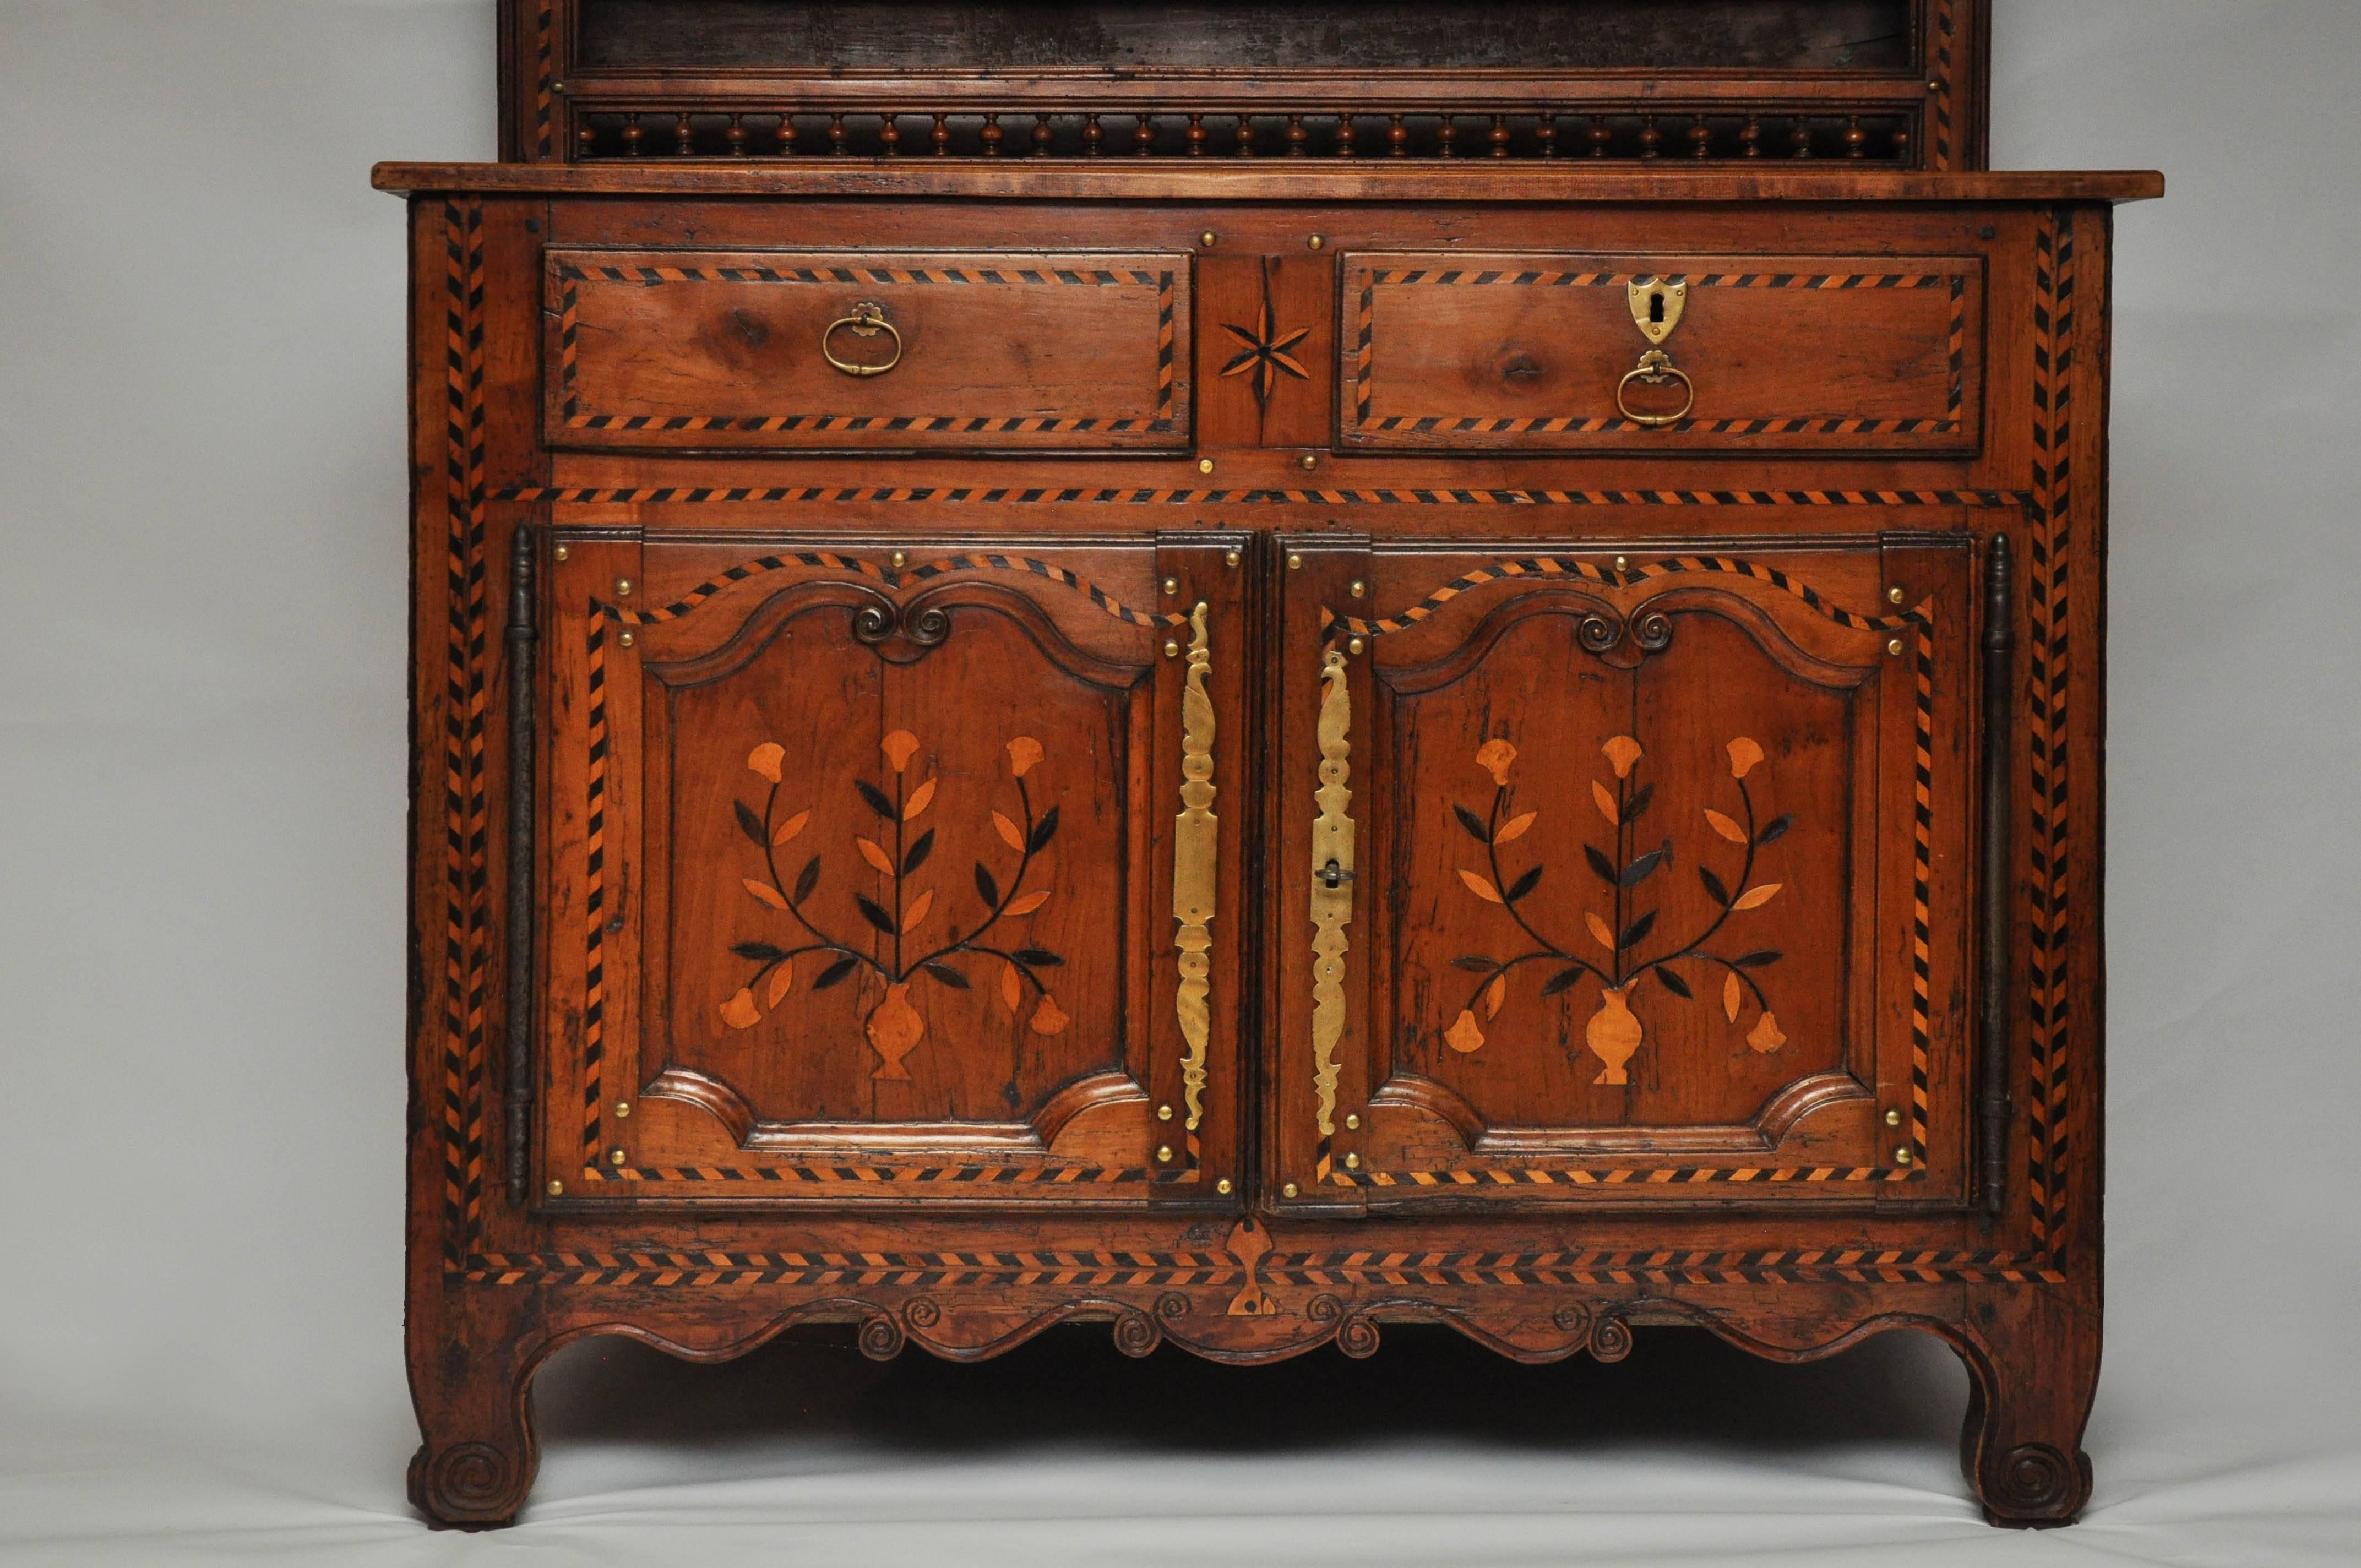 Hand-carved walnut chateau cupboard with a linear crown above a four shelf plate rail, each shelf having an elaborately carved spindle front support. The bottom portion consists of two drawers above a two door commode-all with intricate inlays of